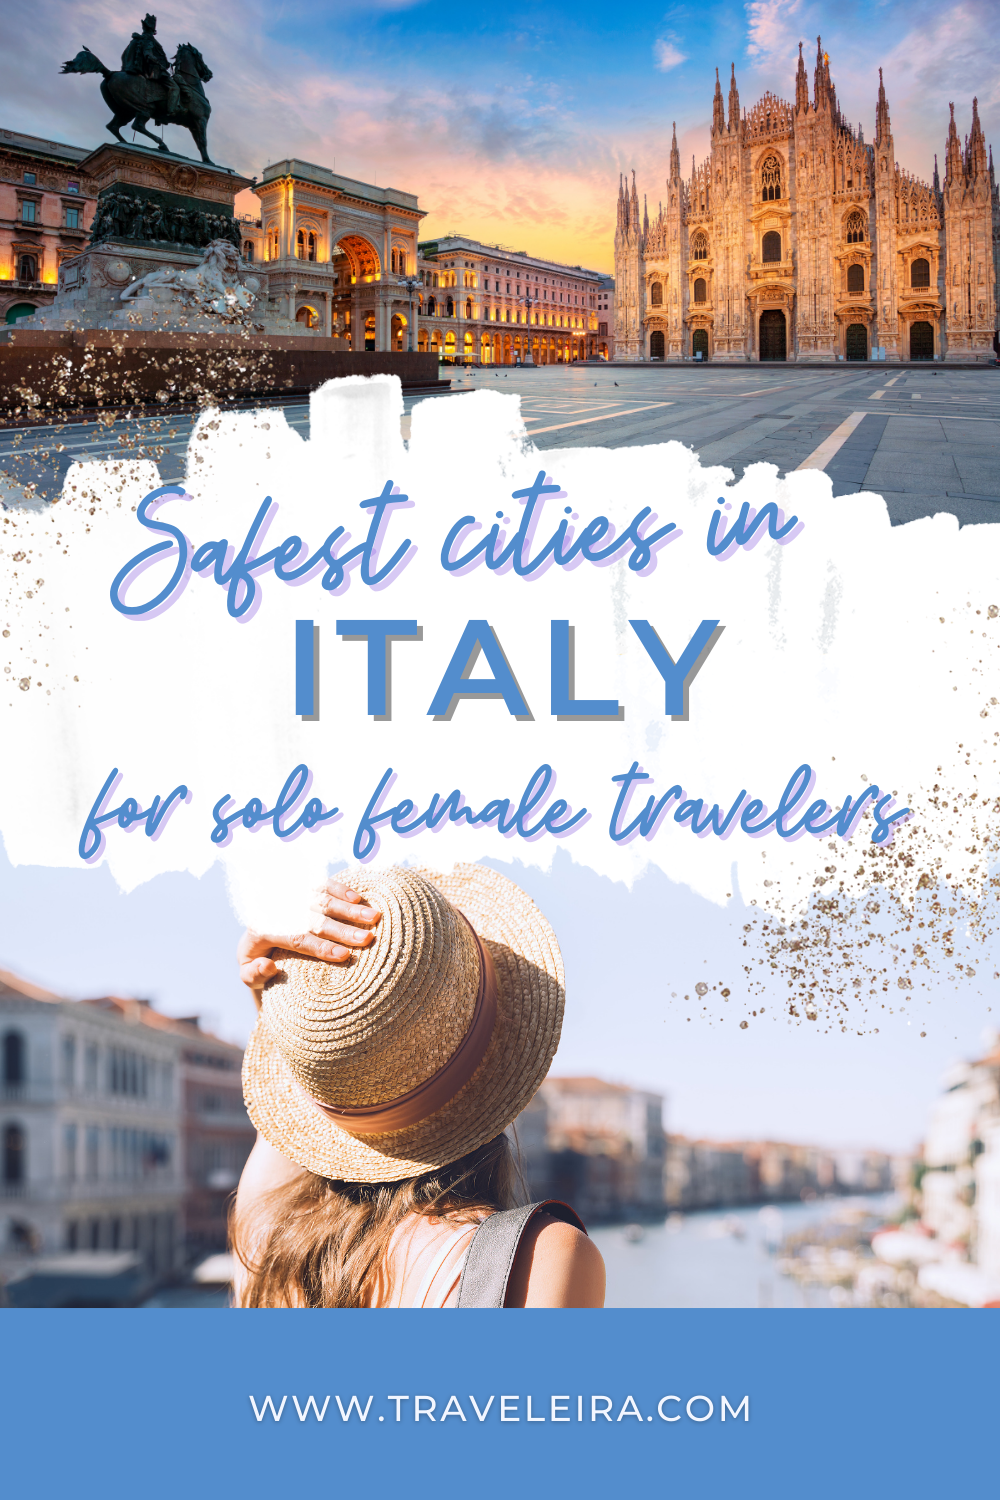 We see which are the safest cities in Italy for solo female travelers according to a group of travel bloggers.